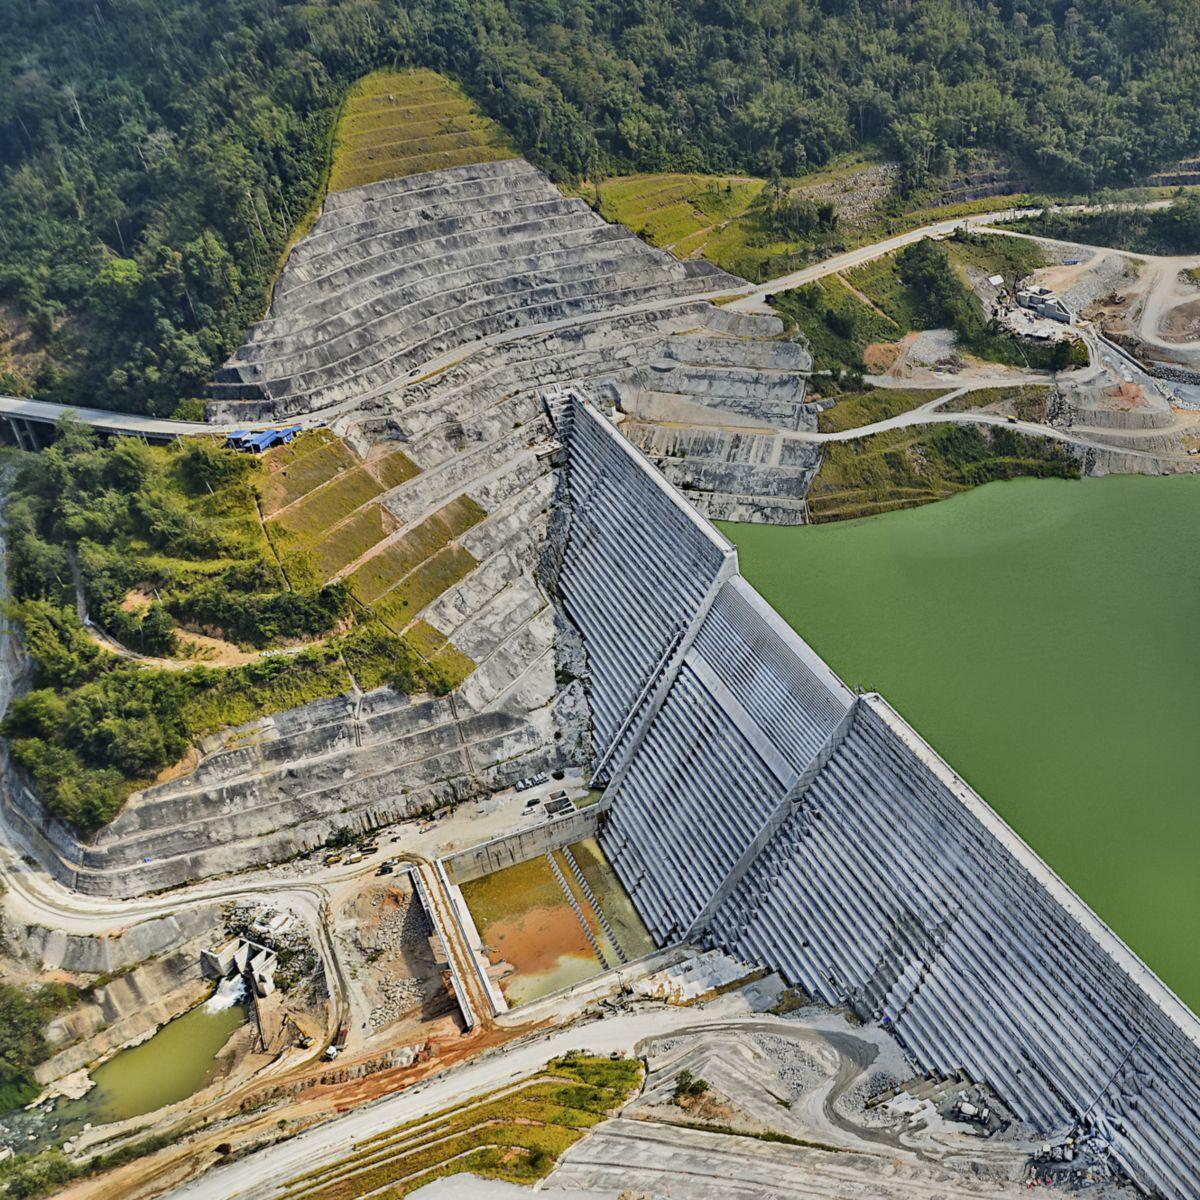 Product: Solutions for Dams